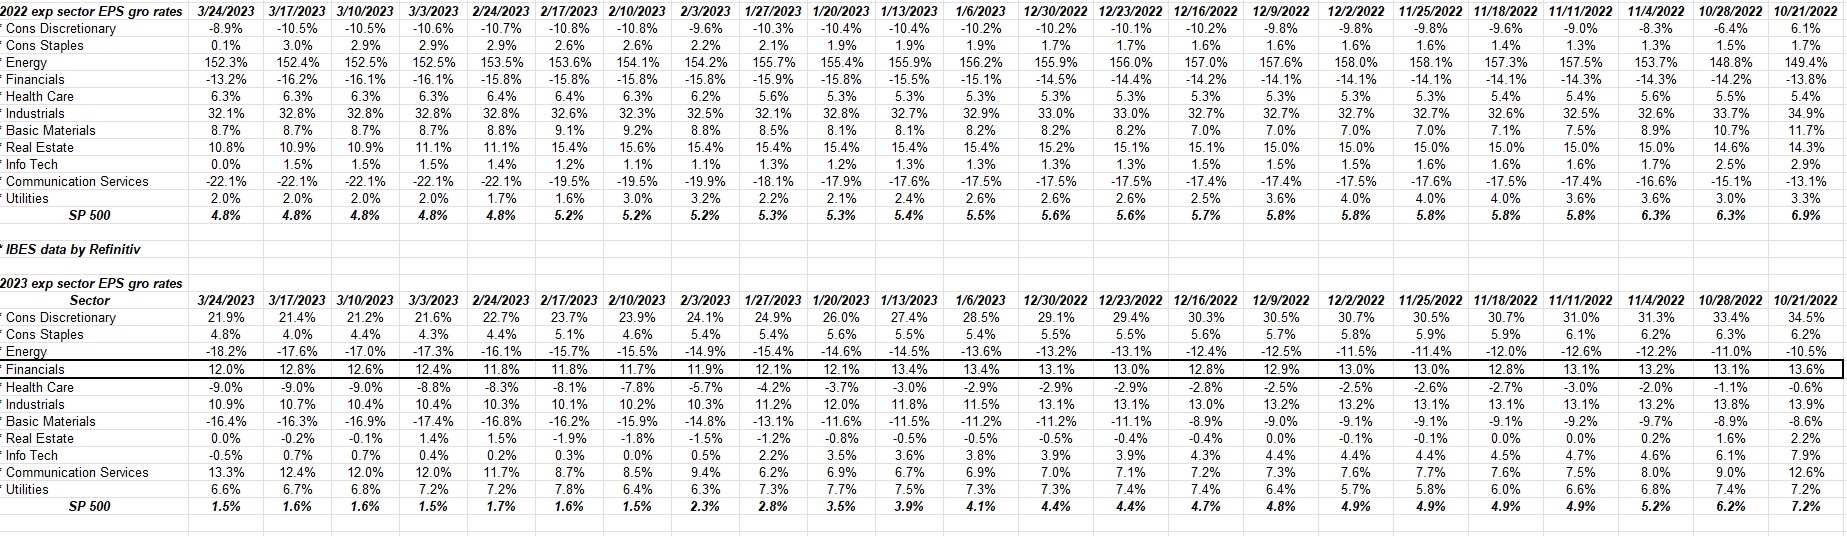 SP 500 EPS Growth By Sector